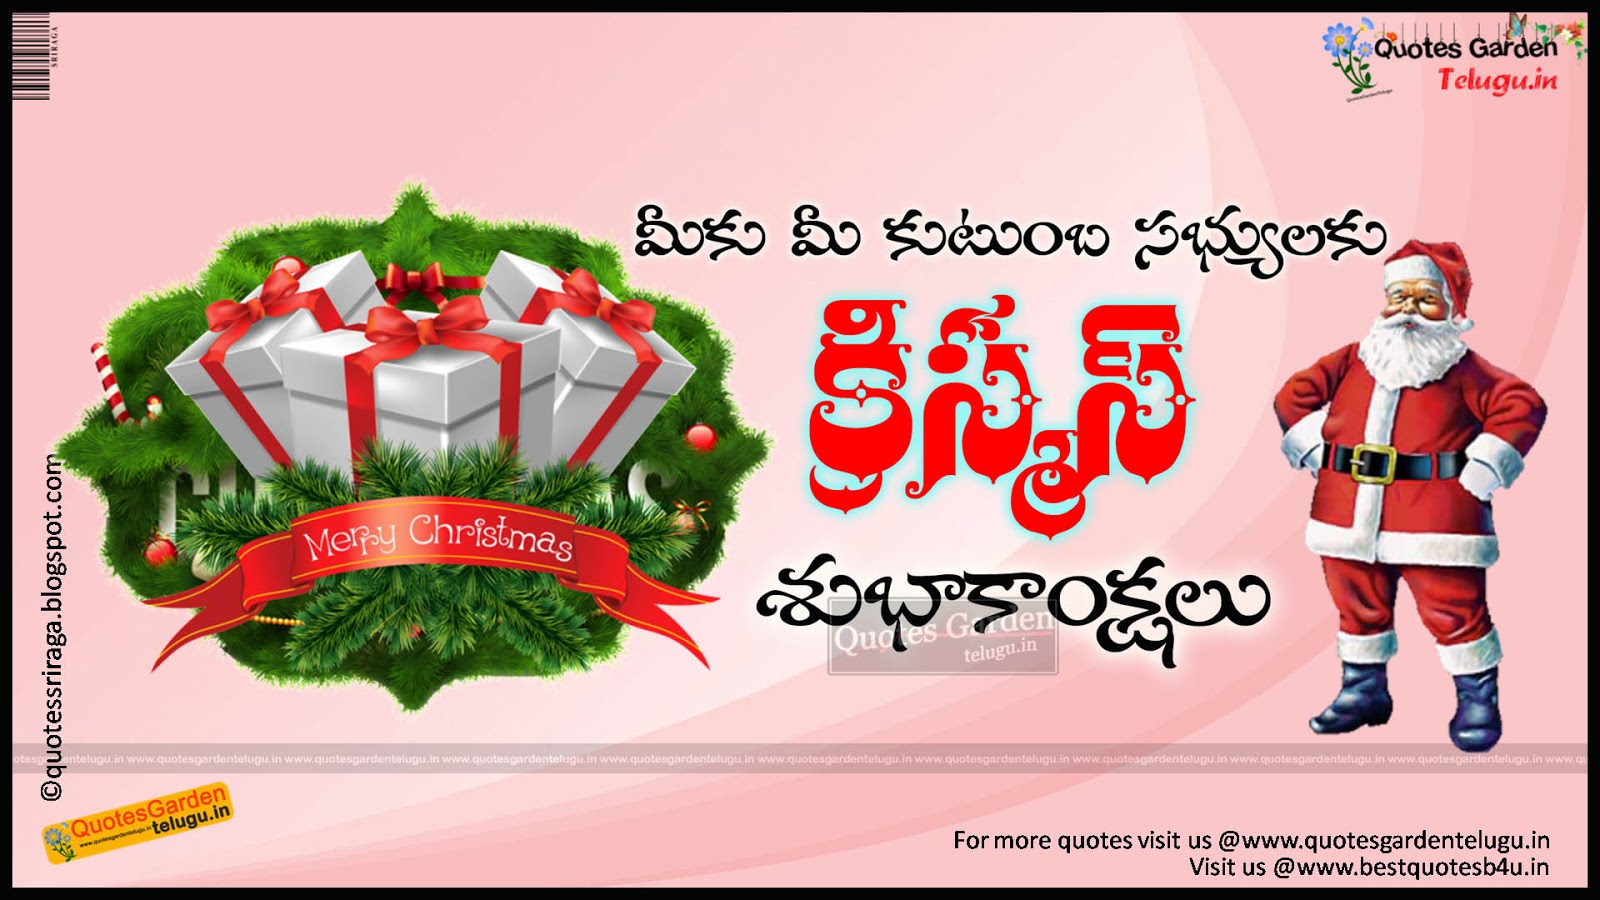 Merry Christmas Telugu Wishes with Bible Quotations Pictures 1484 ...